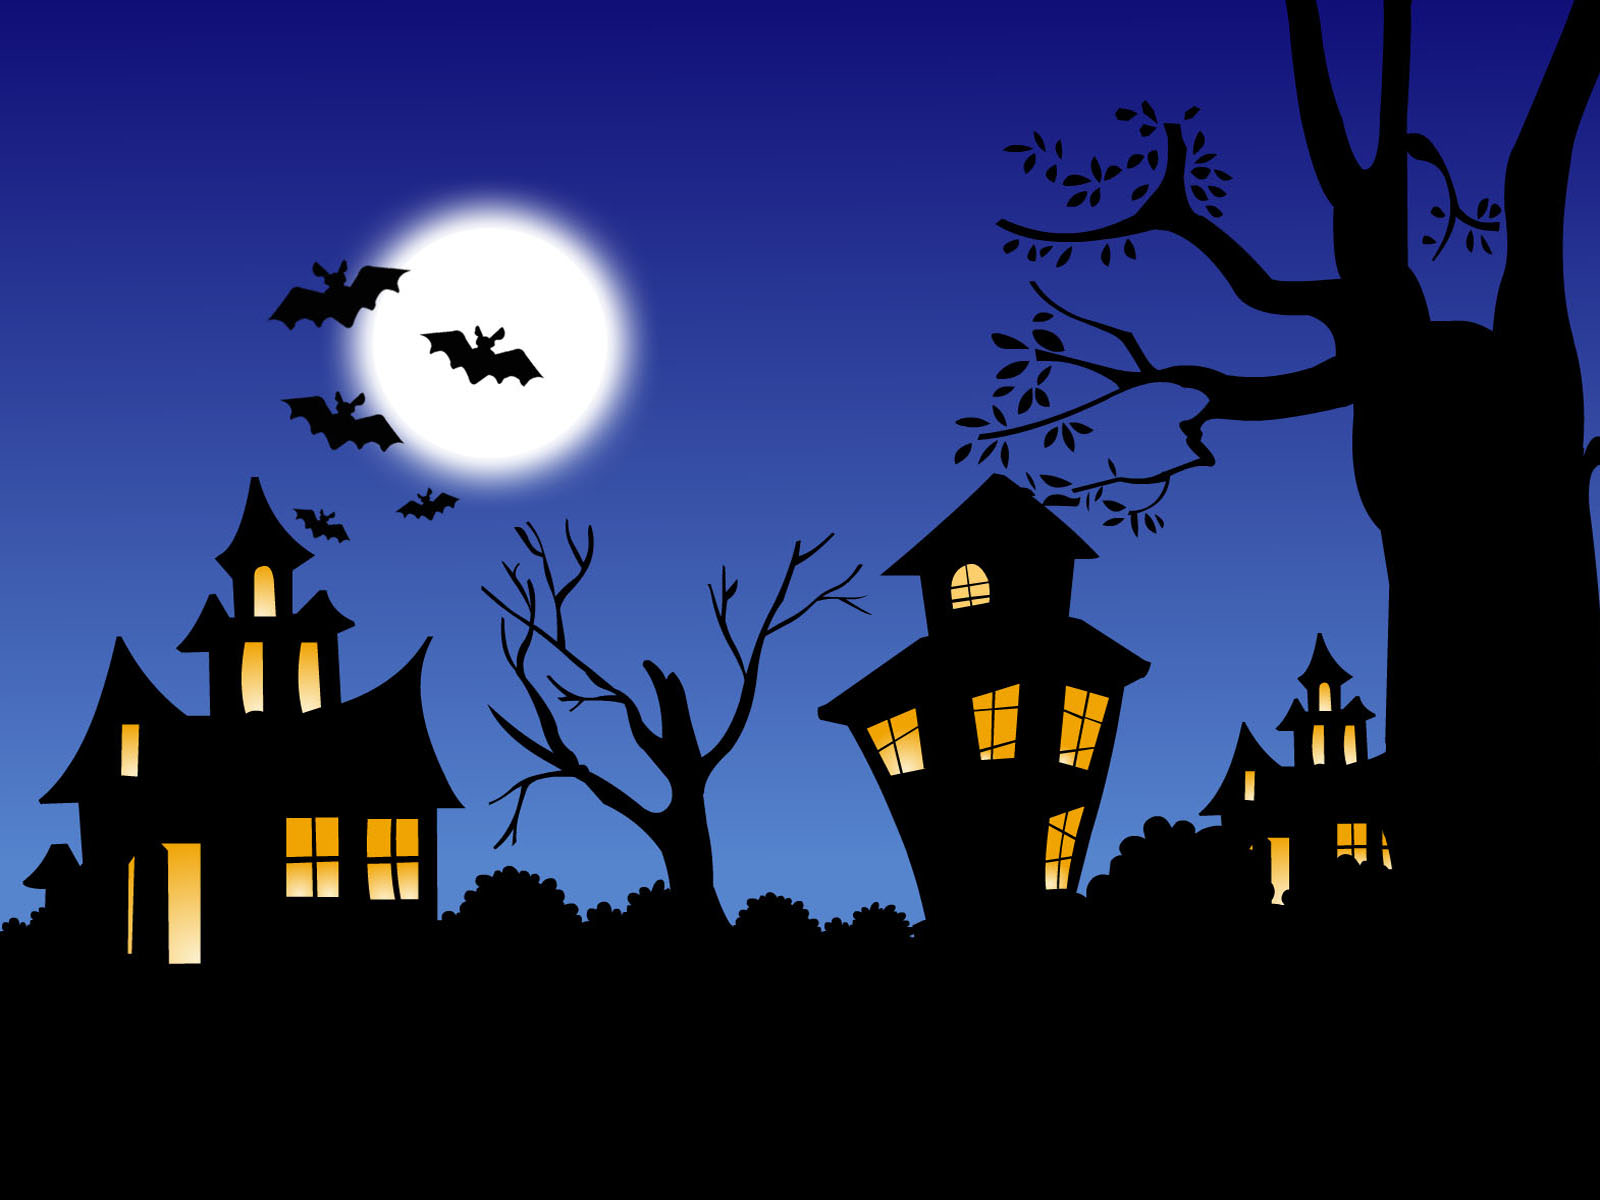 Halloween Night Wallpaper stock images in HD and millions of other royalty-free stock photos, illustrations and vectors in the Shutterstock collection.